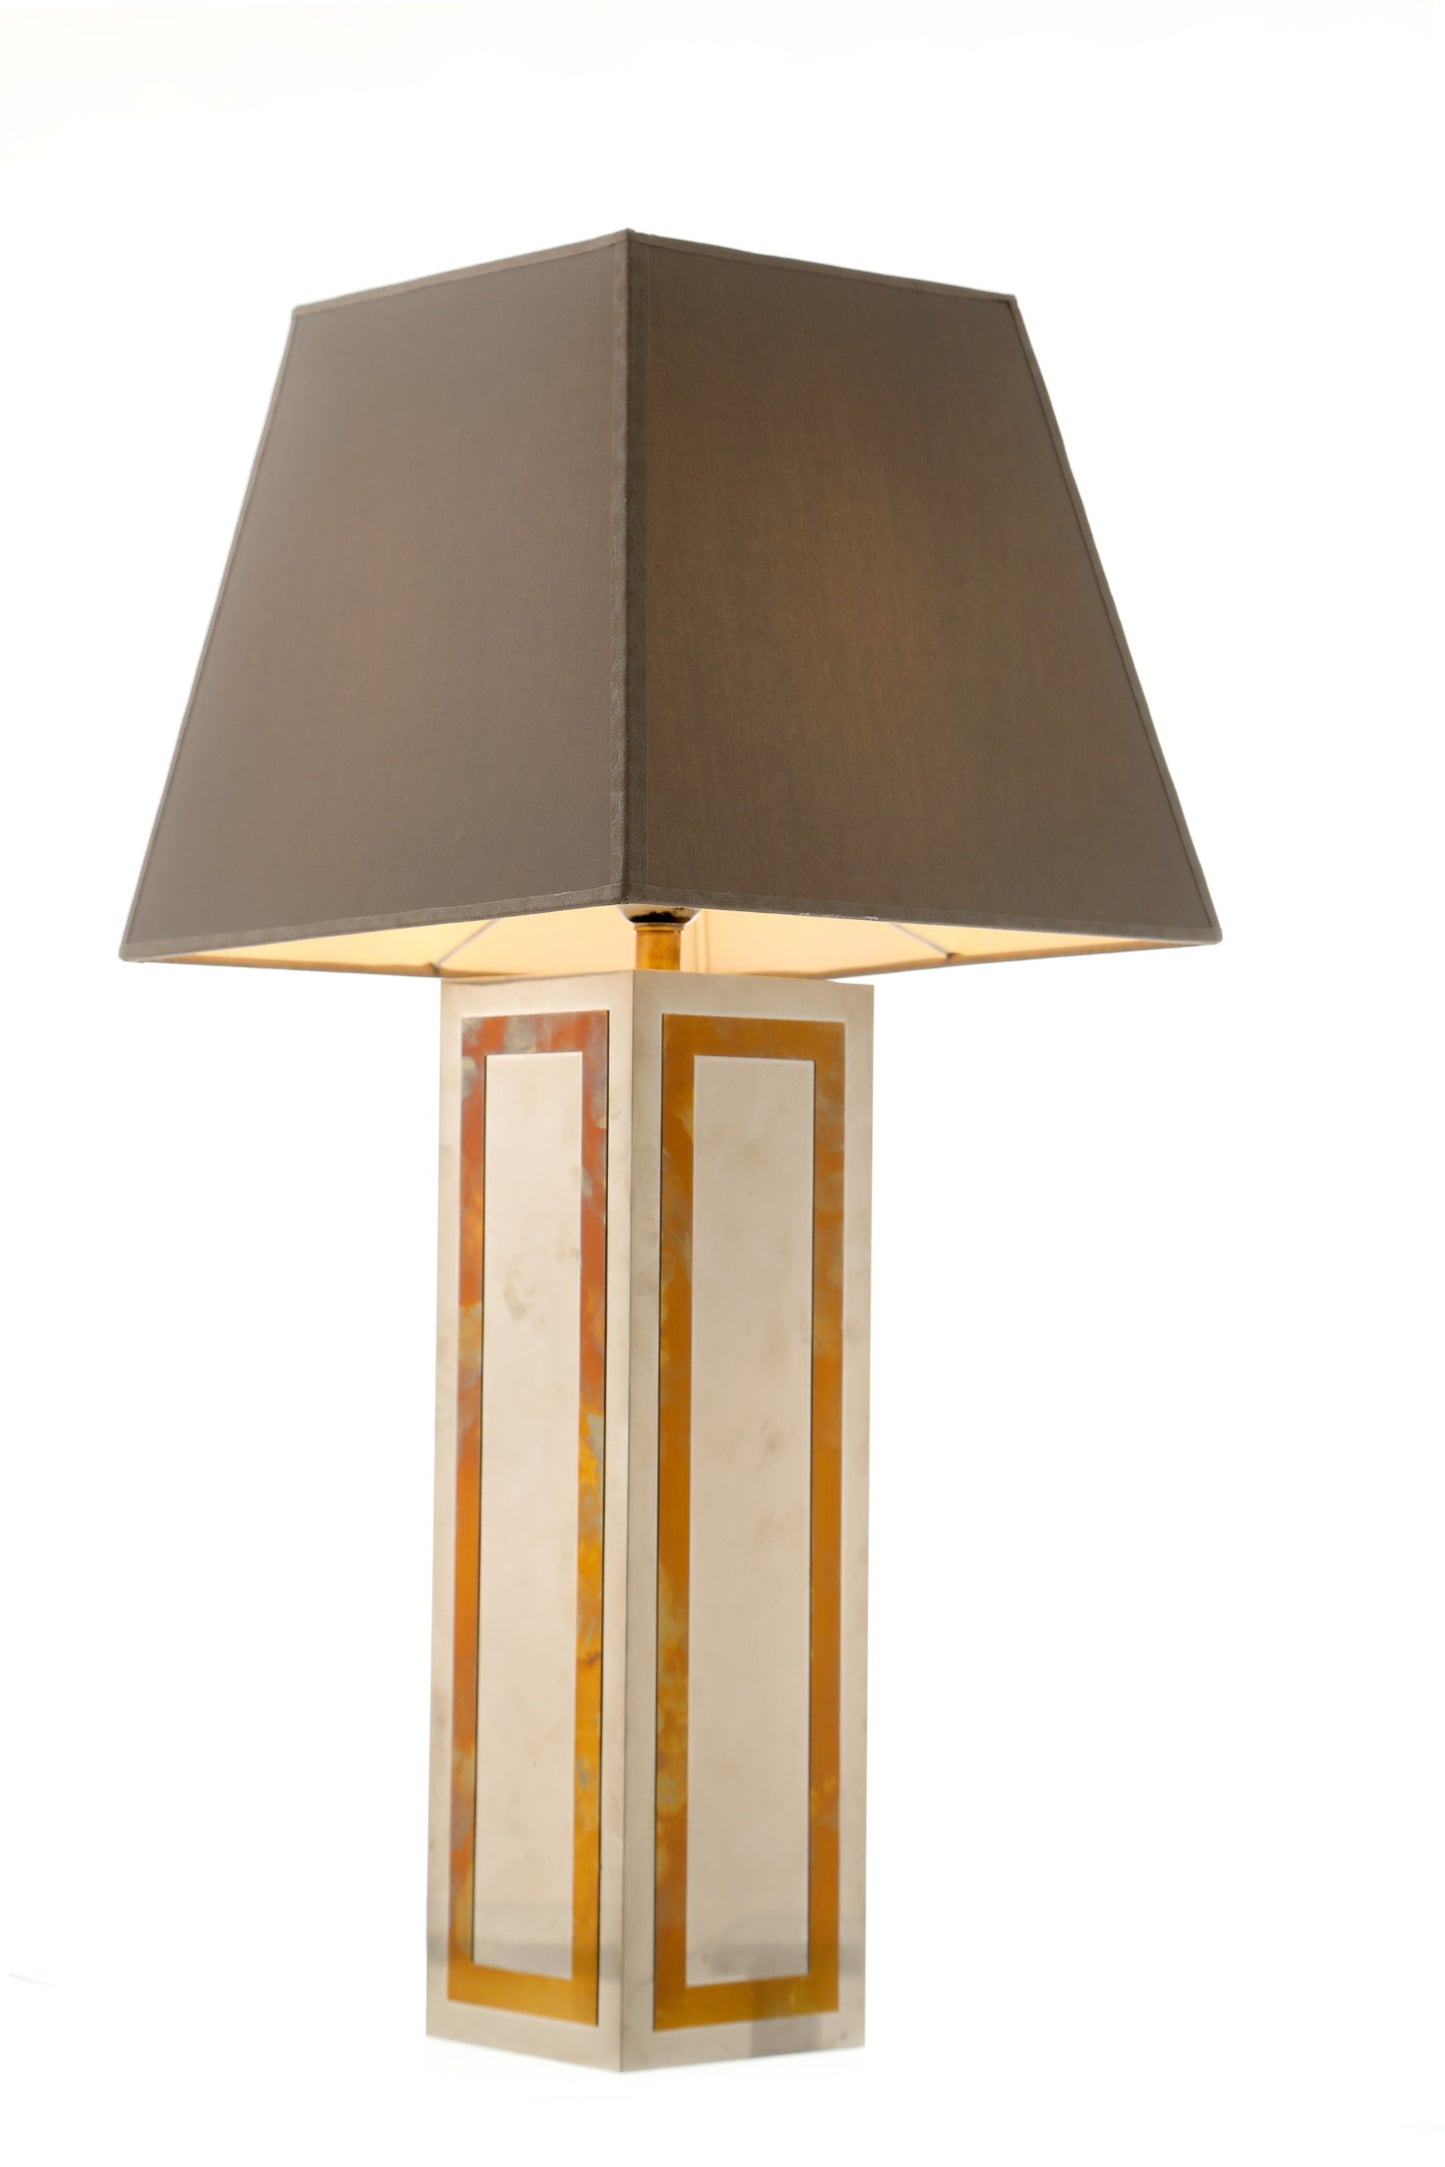 Steel and brass parallelepiped table lamp from the 70s